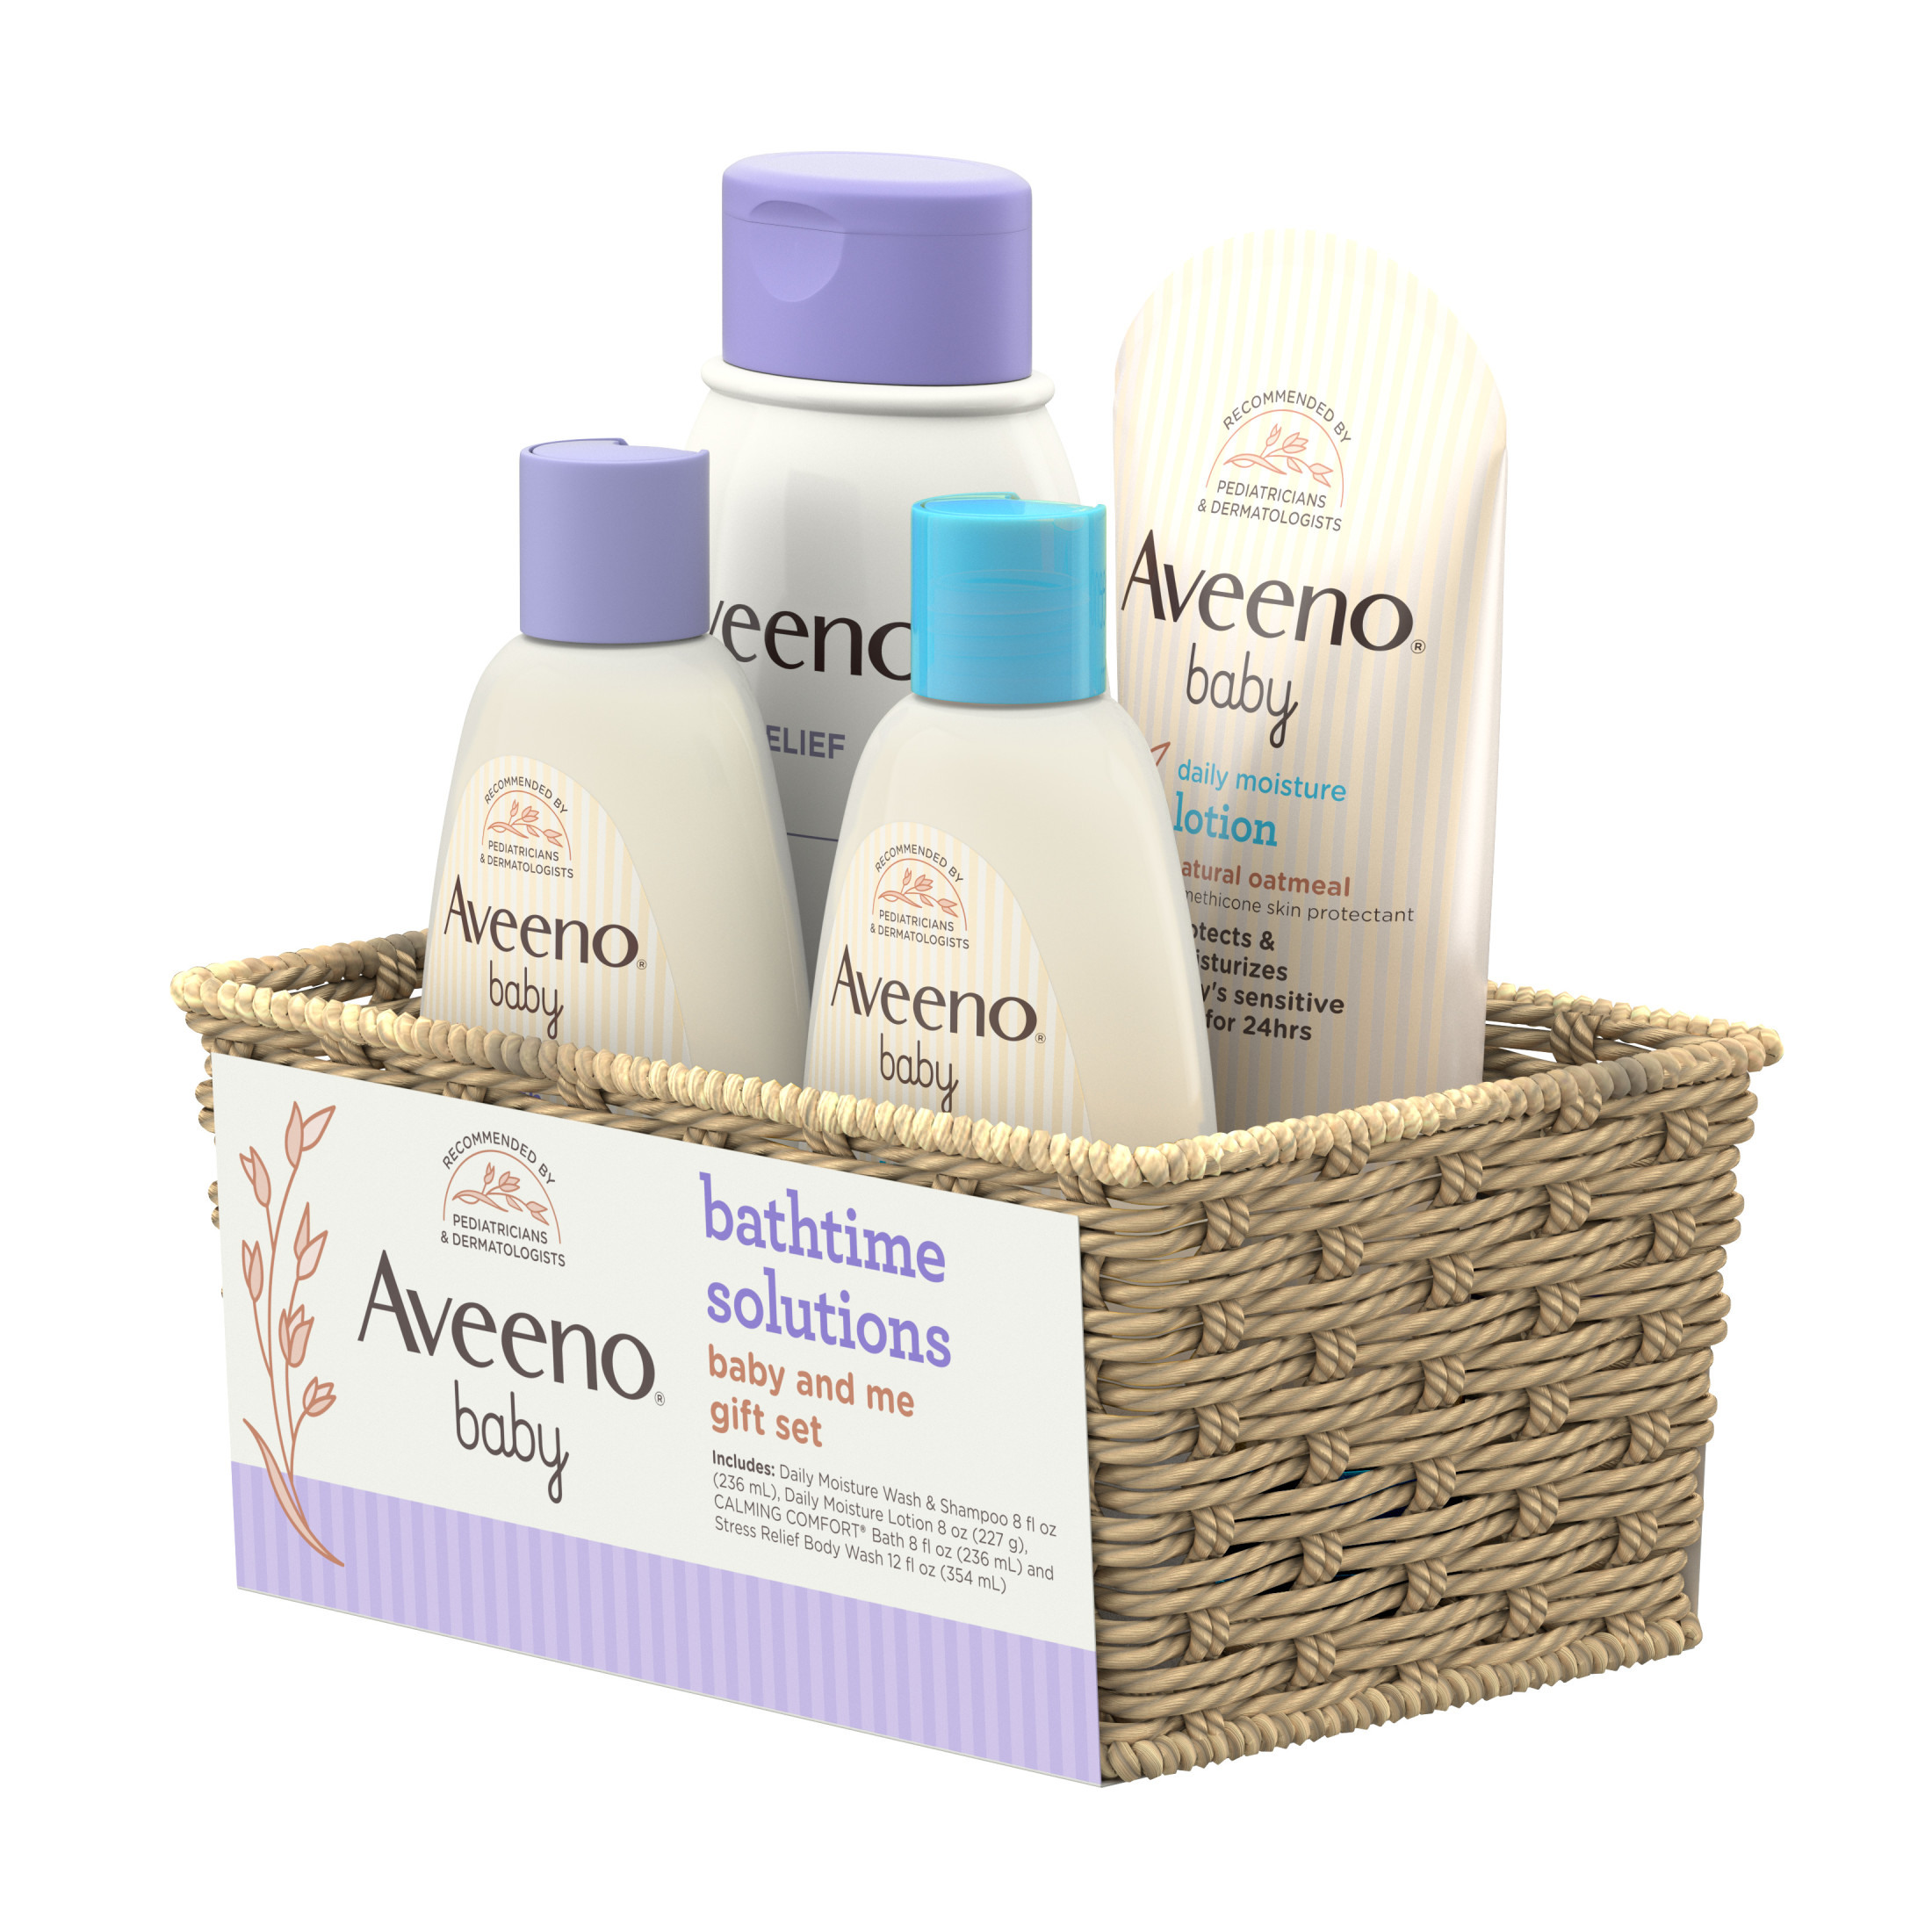 Aveeno Baby Daily Bathtime Solutions Baby & Me Gift Set, 4 items - image 5 of 9